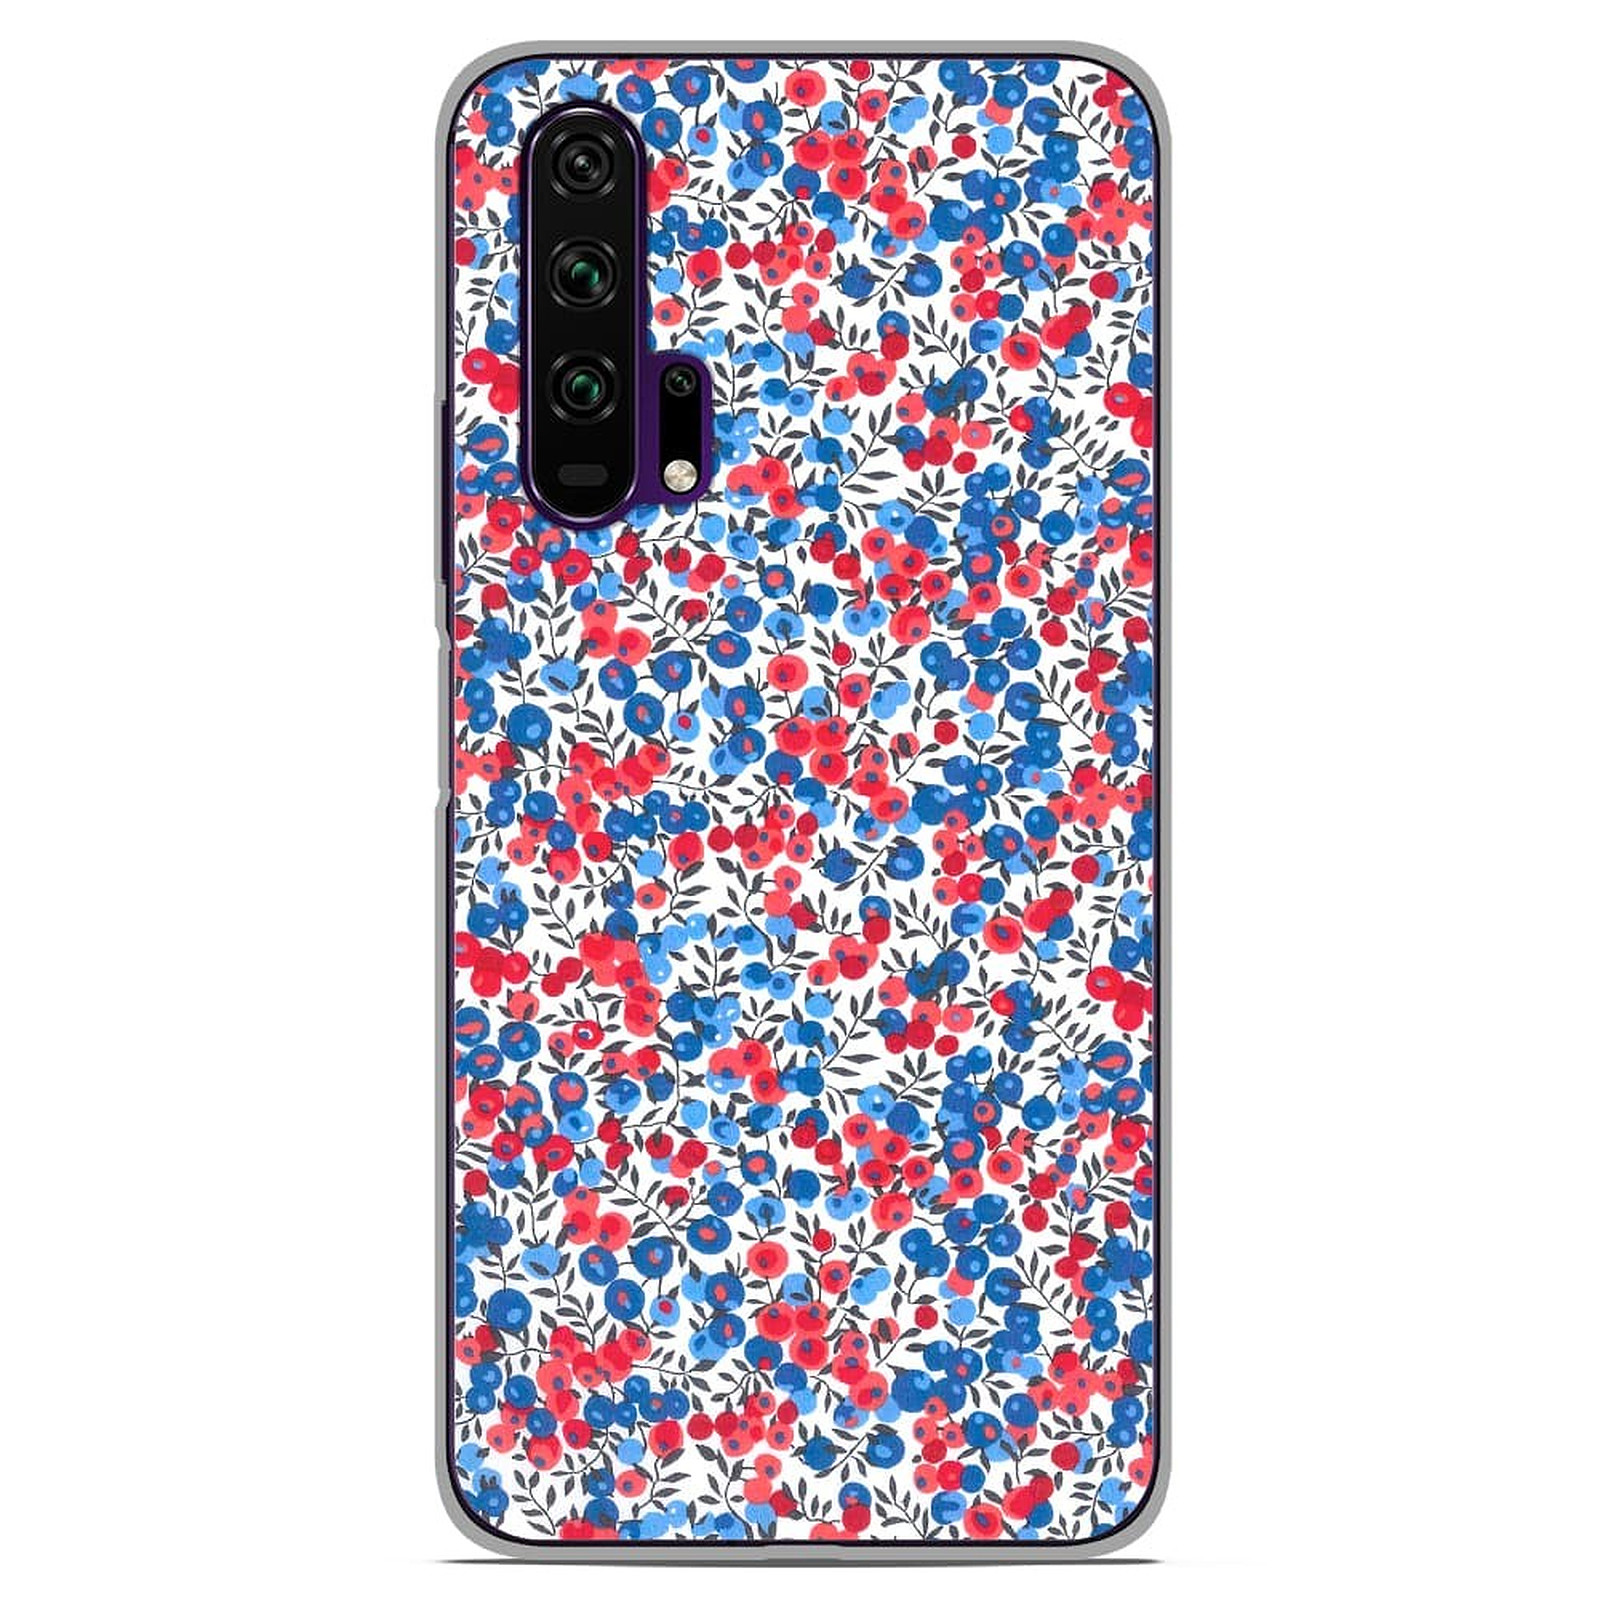 1001 Coques Coque silicone gel Huawei Honor 20 Pro motif Liberty Wiltshire Bleu - Coque telephone 1001Coques